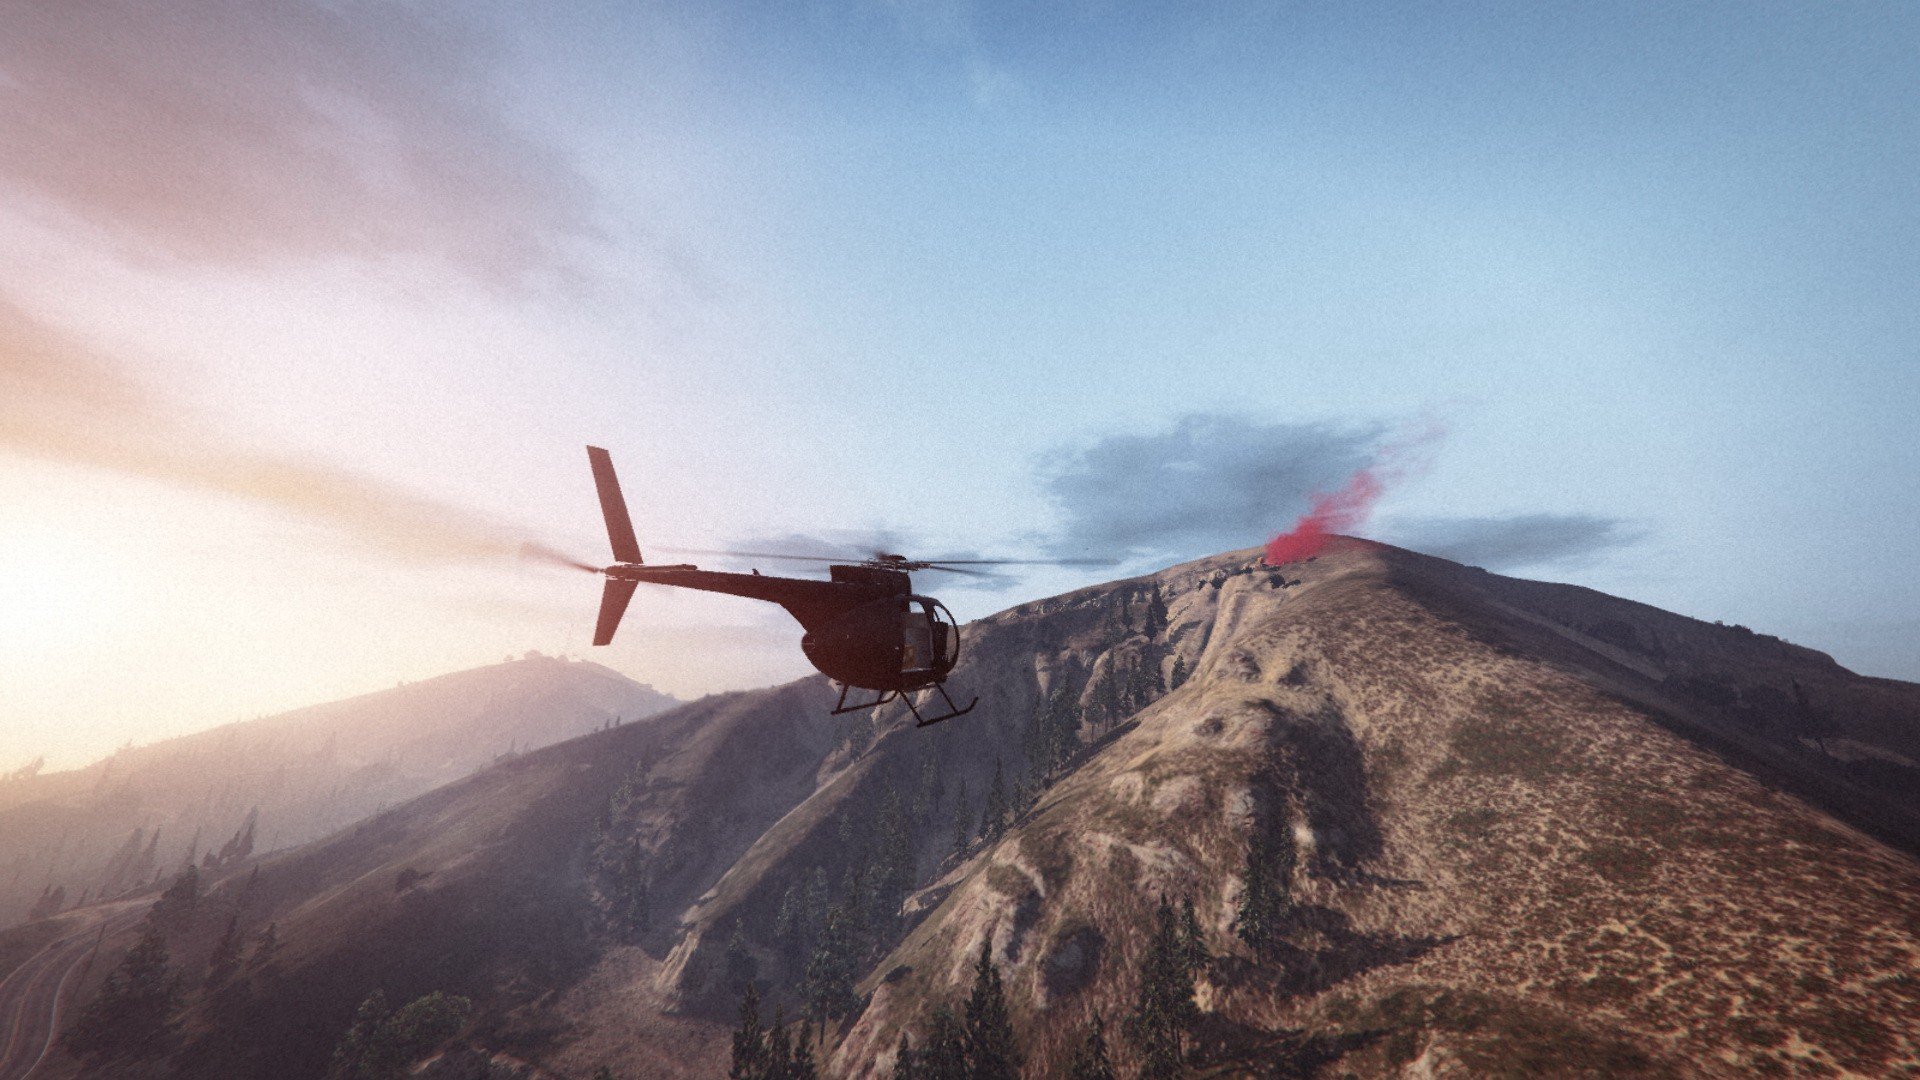 Grand Theft Auto V, Grand Theft Auto Online, Rockstar Games, Mountains, Morning, Beacon, Helicopters Wallpaper